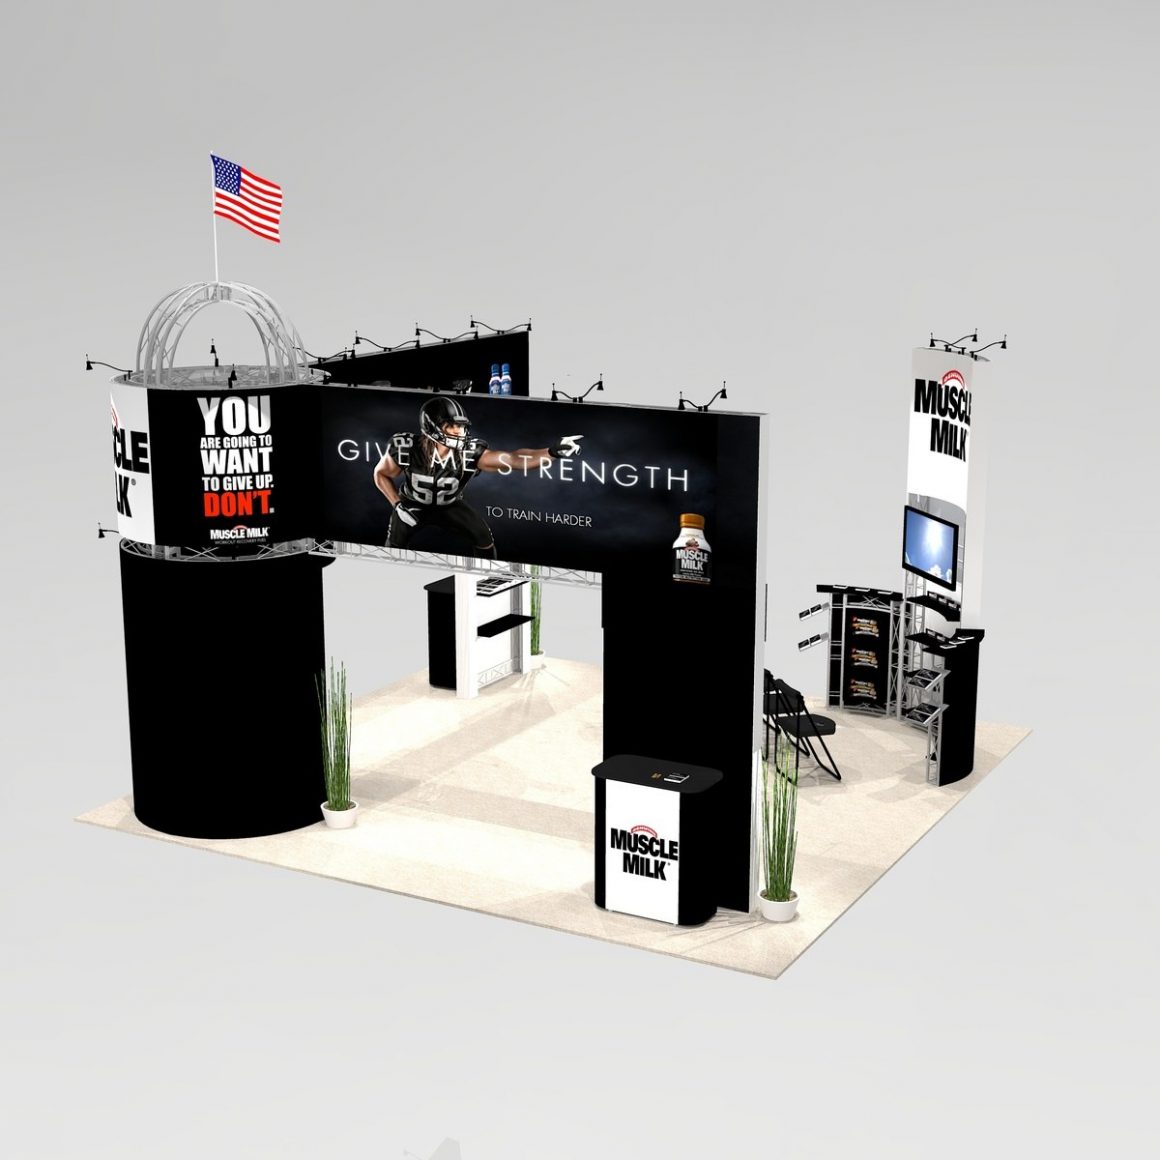 Trade show exhibit design featuring domed tower and ample seating with product display CHI2020 Graphic Package B